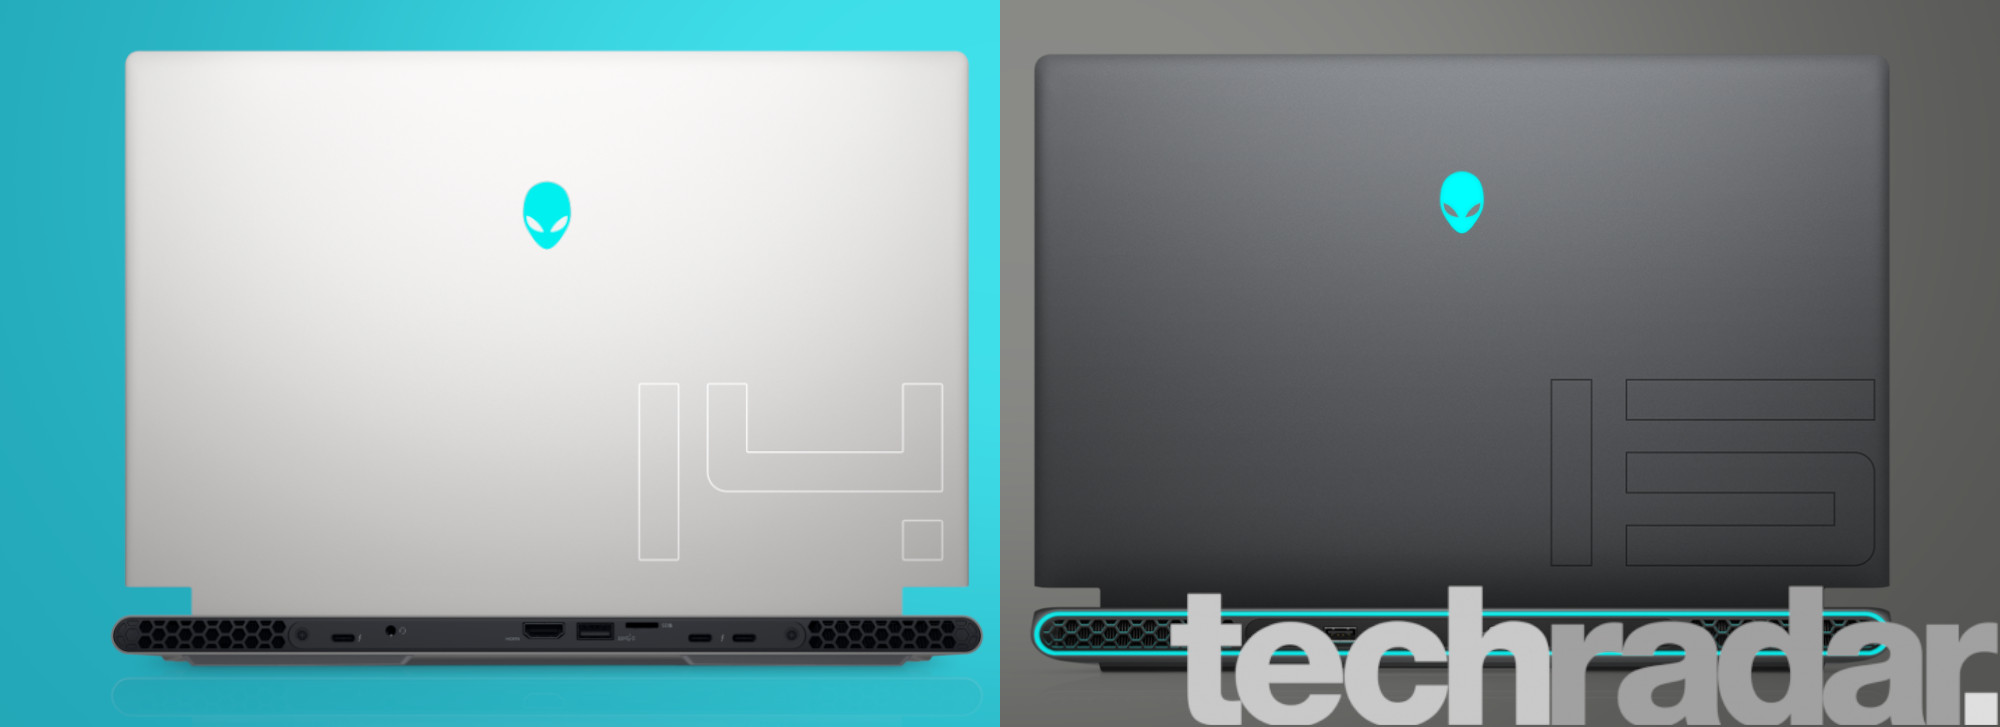 Two alienware gaming laptops on teal and grey background with techradar logo